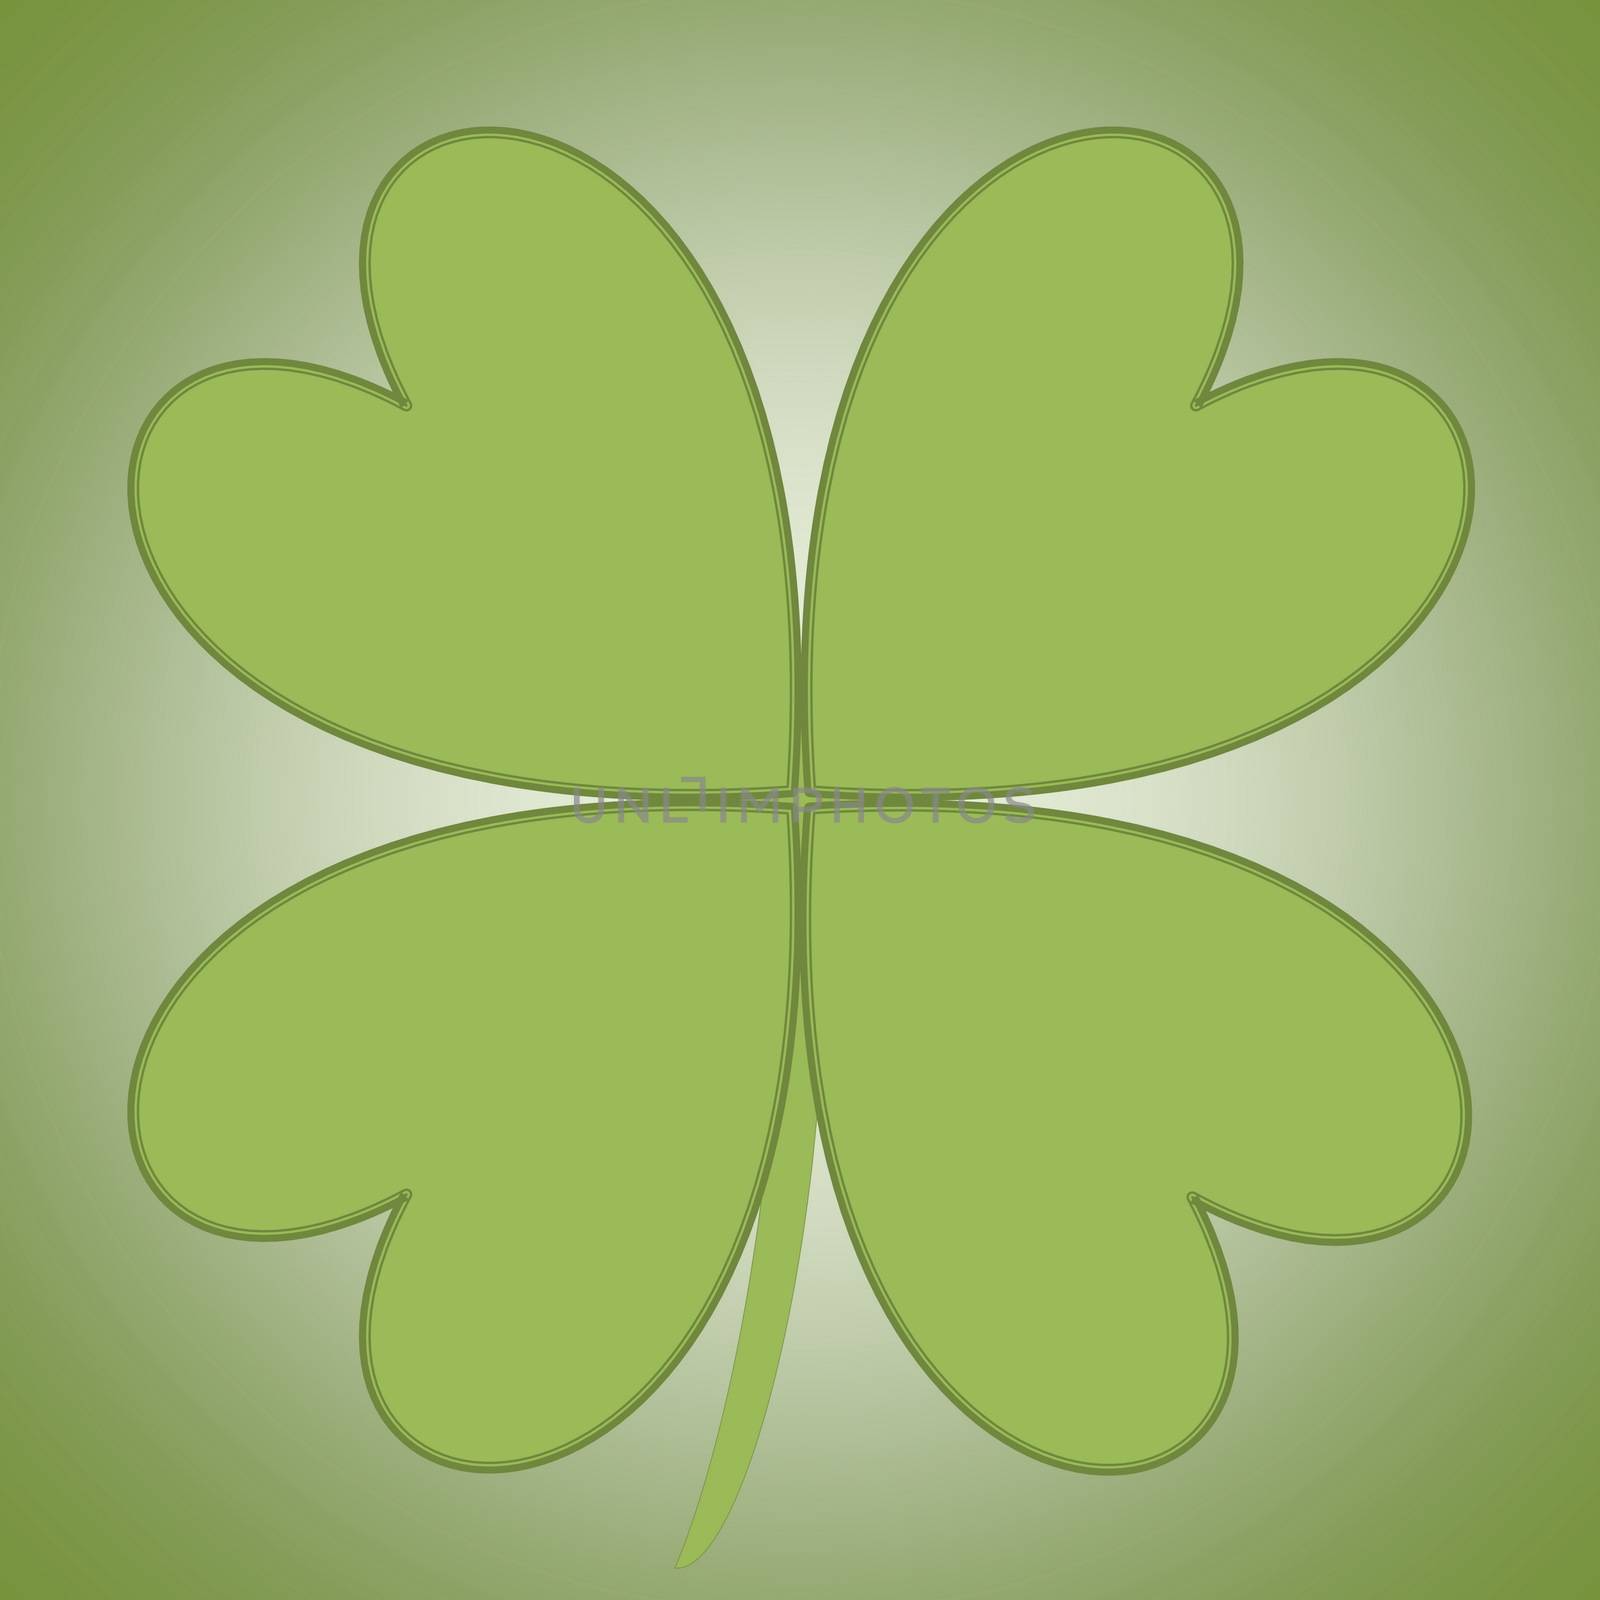 Four leaves clover in green color background